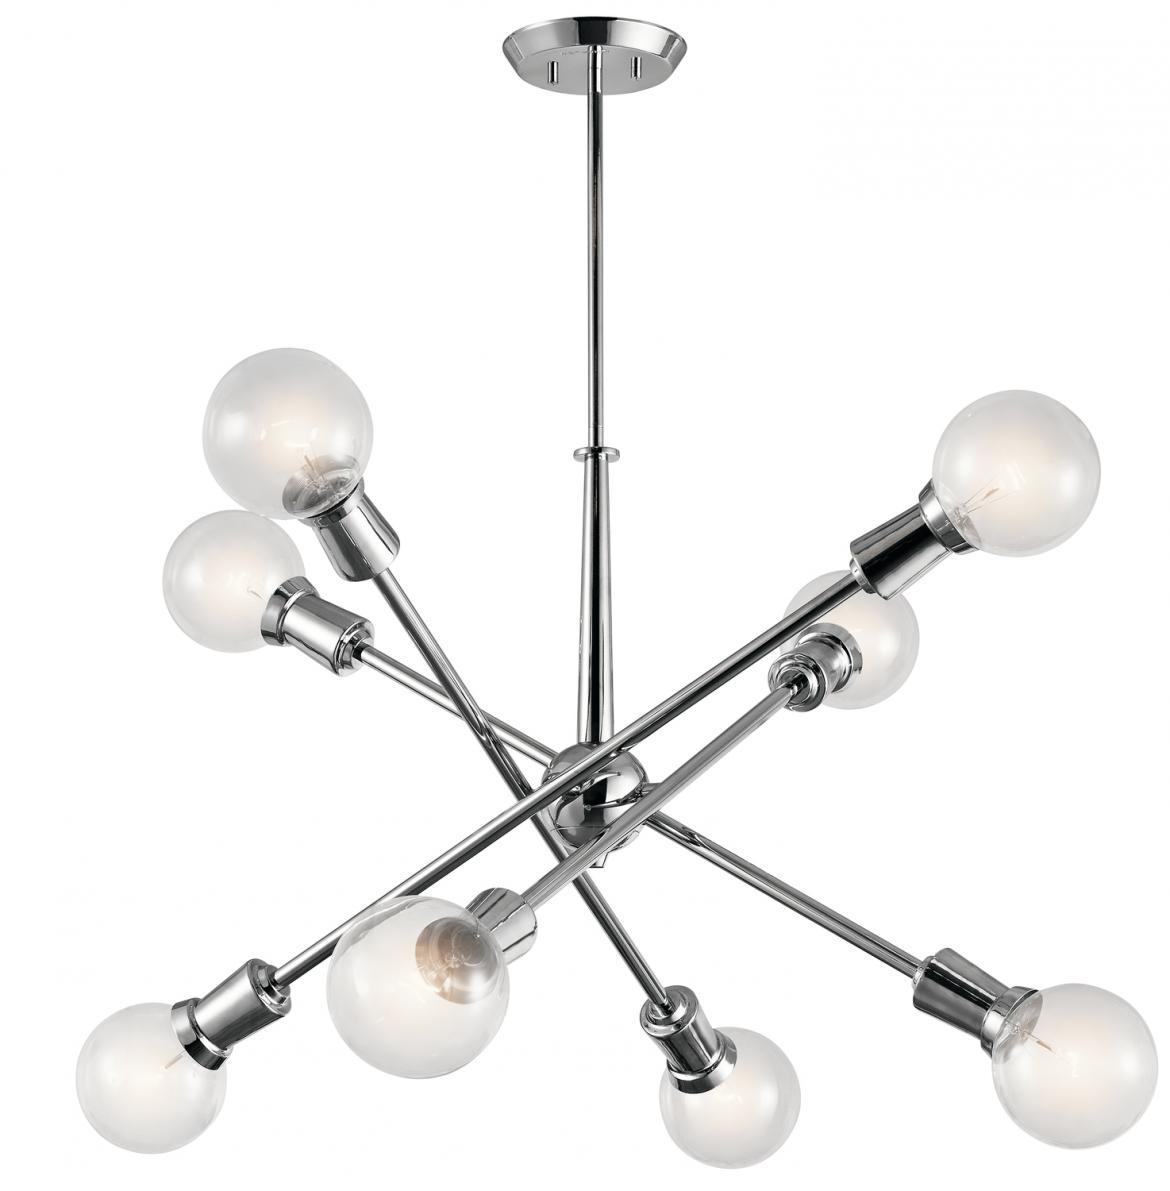 Kichler Armstrong chandelier silo